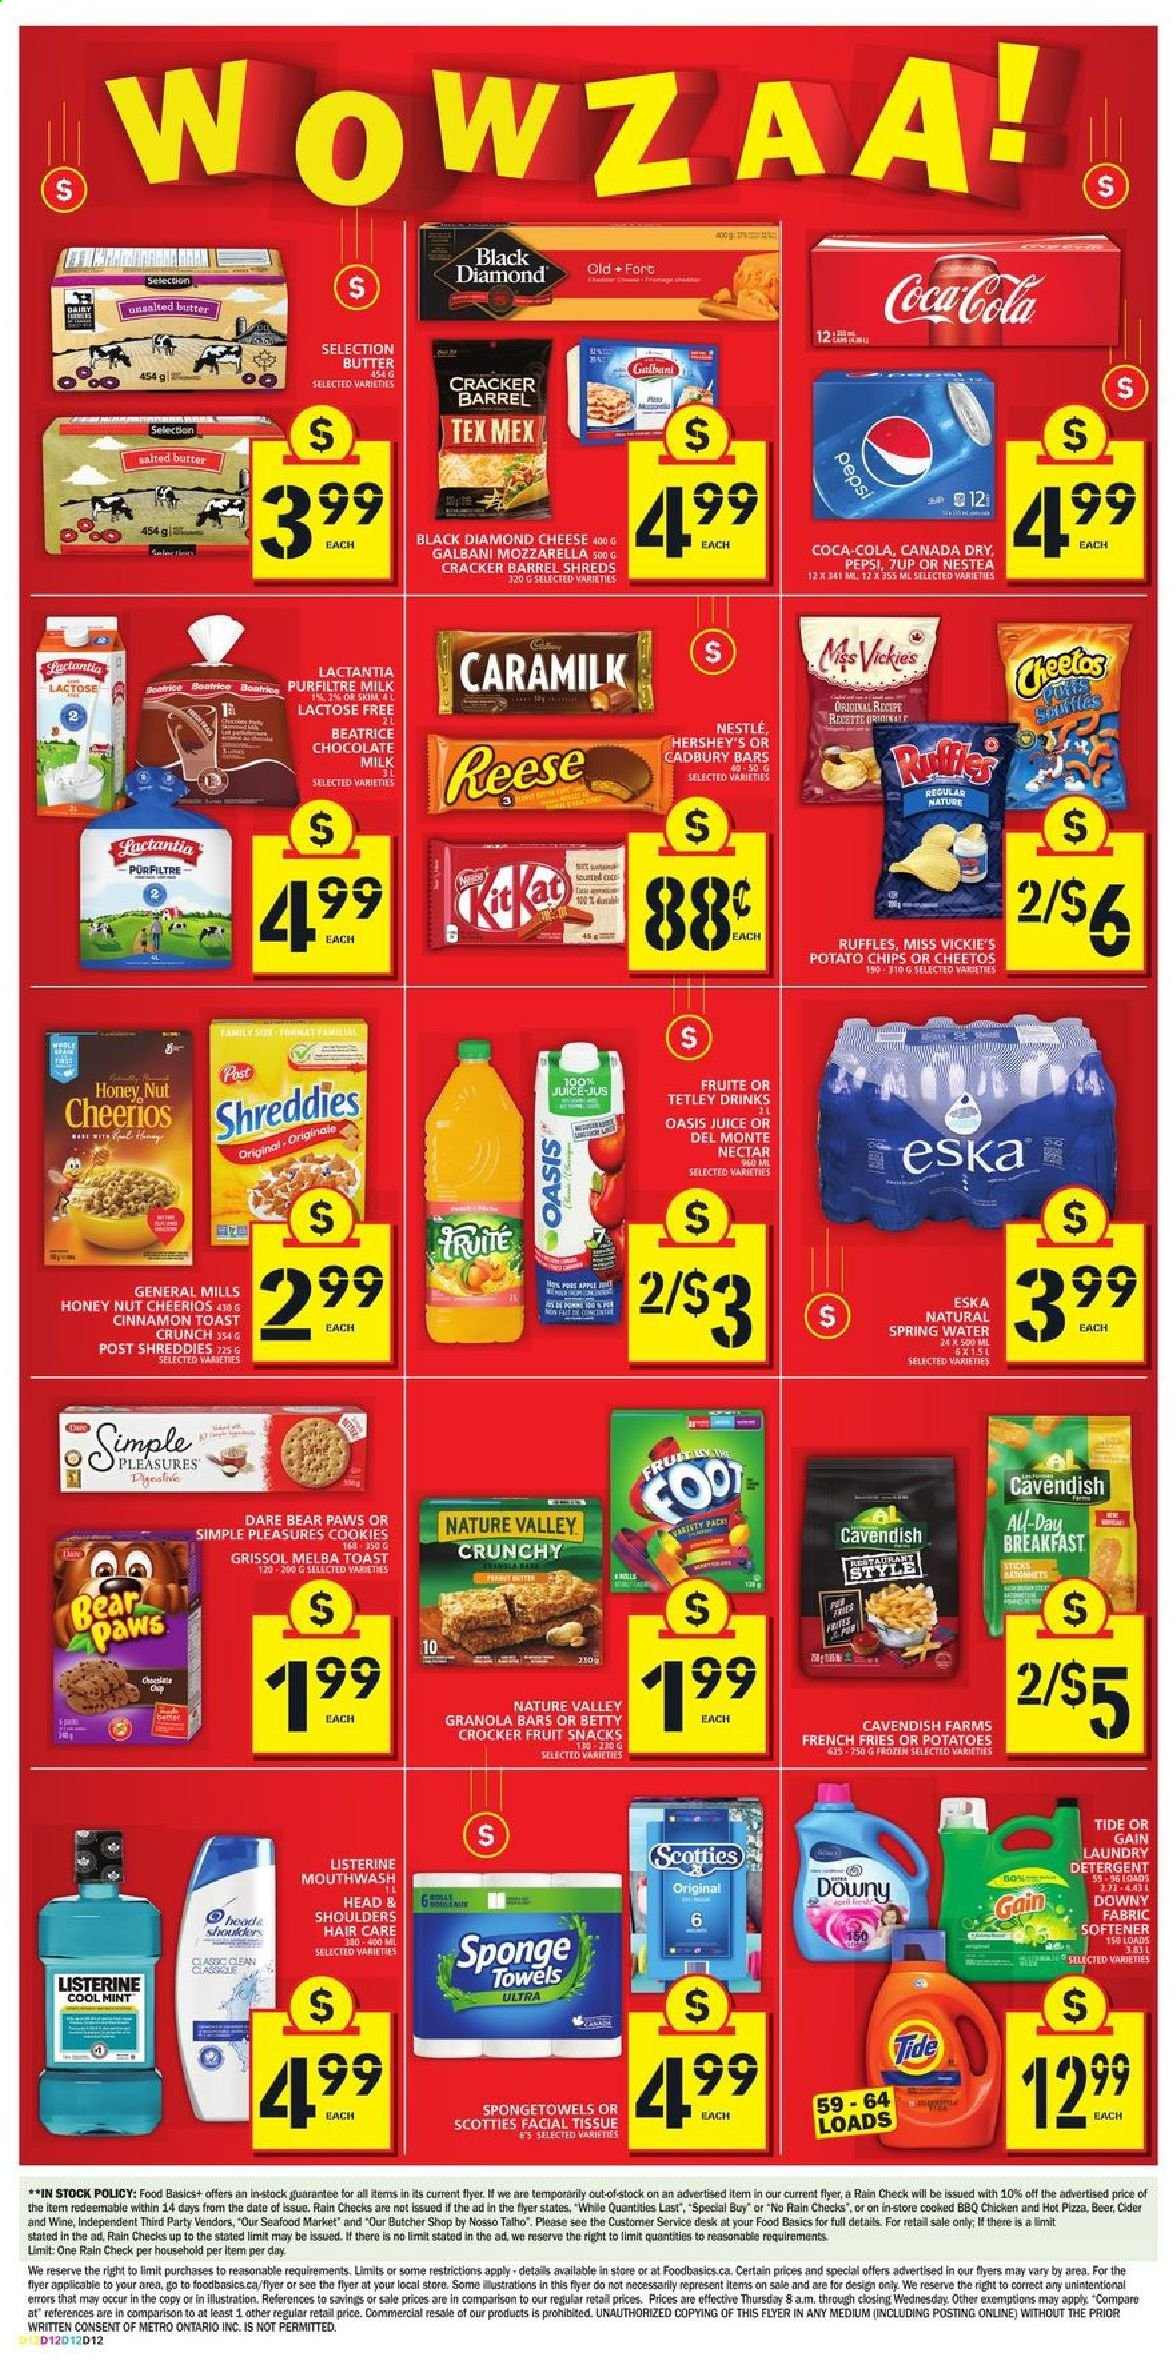 thumbnail - Food Basics Flyer - May 27, 2021 - June 02, 2021 - Sales products - seafood, pizza, Galbani, milk, butter, Hershey's, potato fries, french fries, cookies, milk chocolate, chocolate, crackers, Cadbury, fruit snack, potato chips, Cheetos, Ruffles, Cheerios, granola bar, Nature Valley, cinnamon, Canada Dry, Coca-Cola, Pepsi, juice, 7UP, spring water, tea, wine, cider, beer, tissues, Gain, Tide, fabric softener, laundry detergent, Downy Laundry, mouthwash, sponge, towel, Paws, Nestlé, Listerine, Head & Shoulders, chips. Page 8.